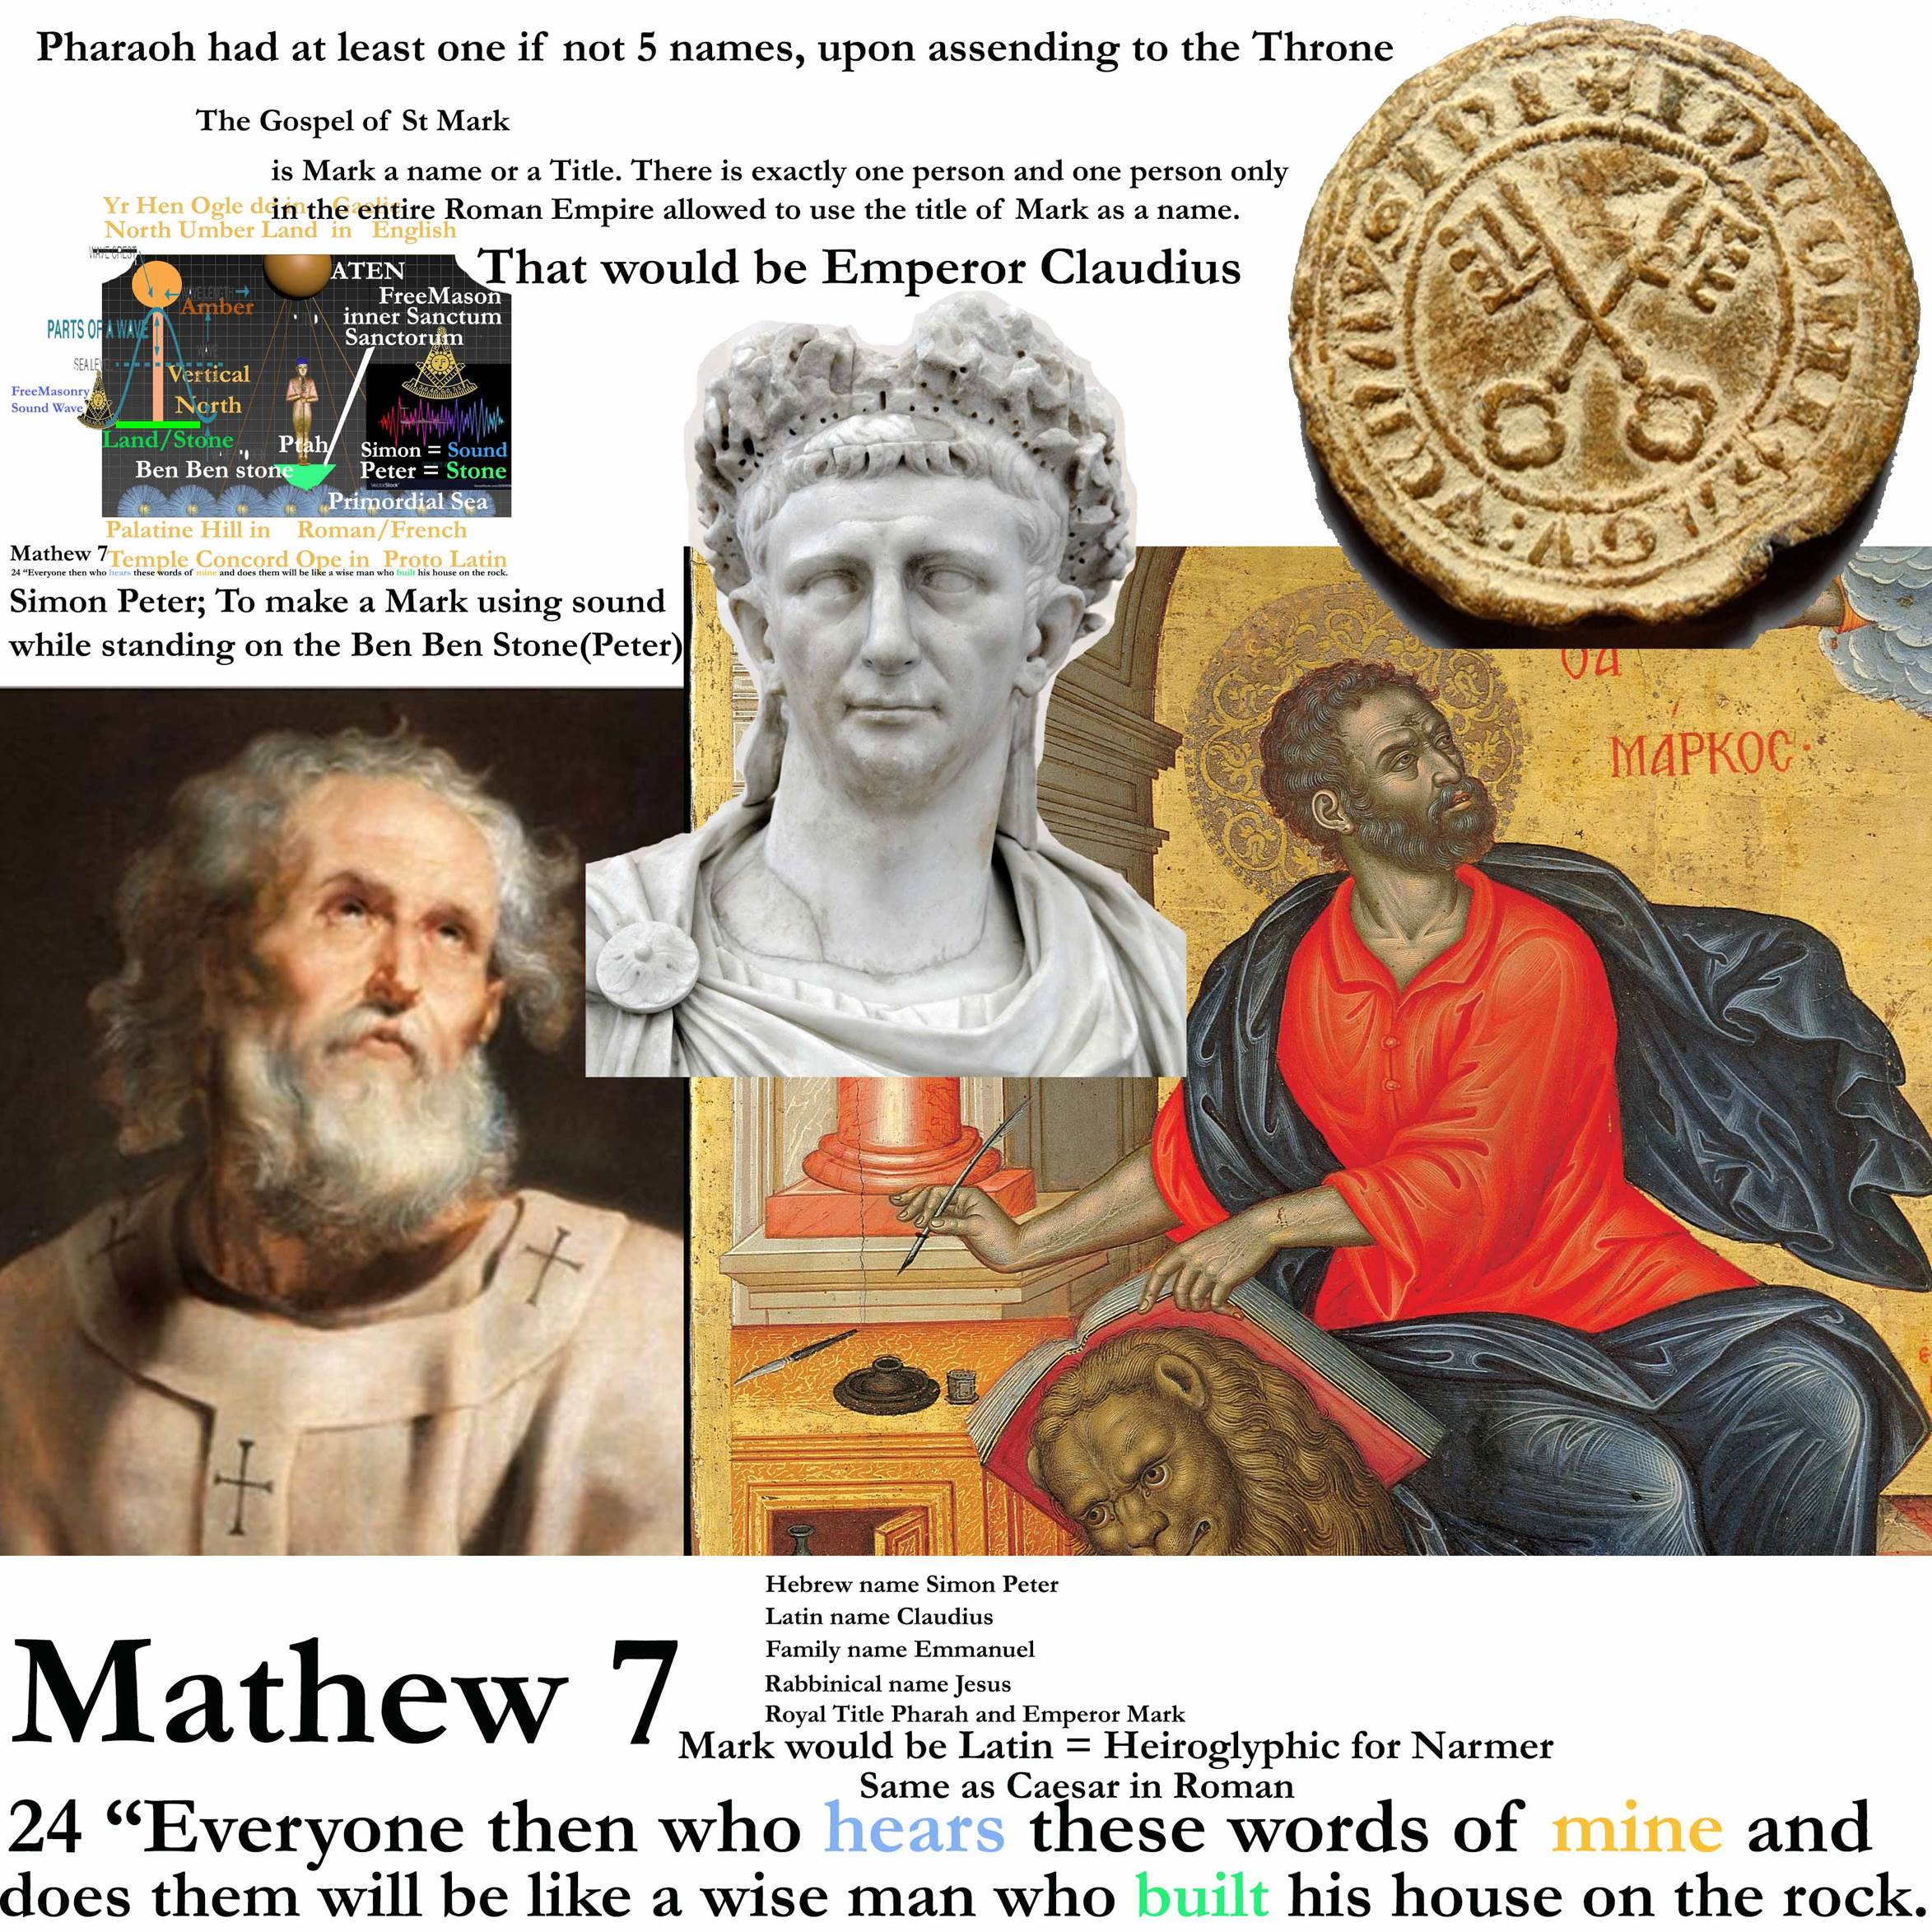 A collage of ancient artifacts

Description automatically generated